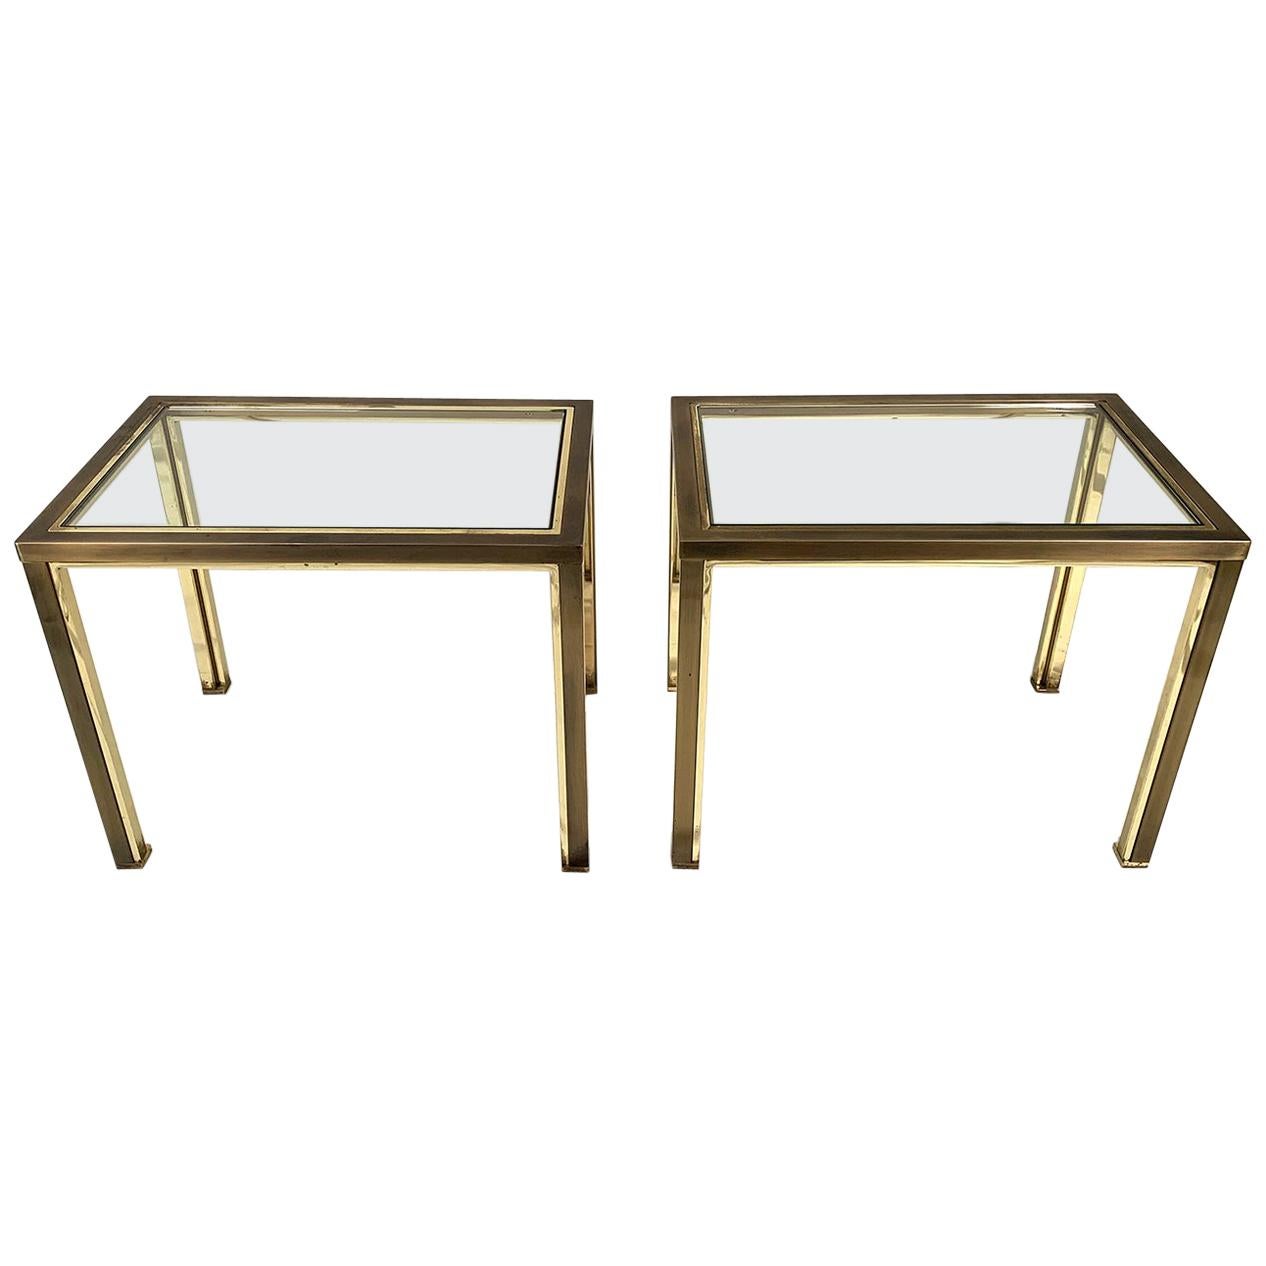 Pair of Brushed steel and Brass Side Tables from Belgo Chrome, 1980s